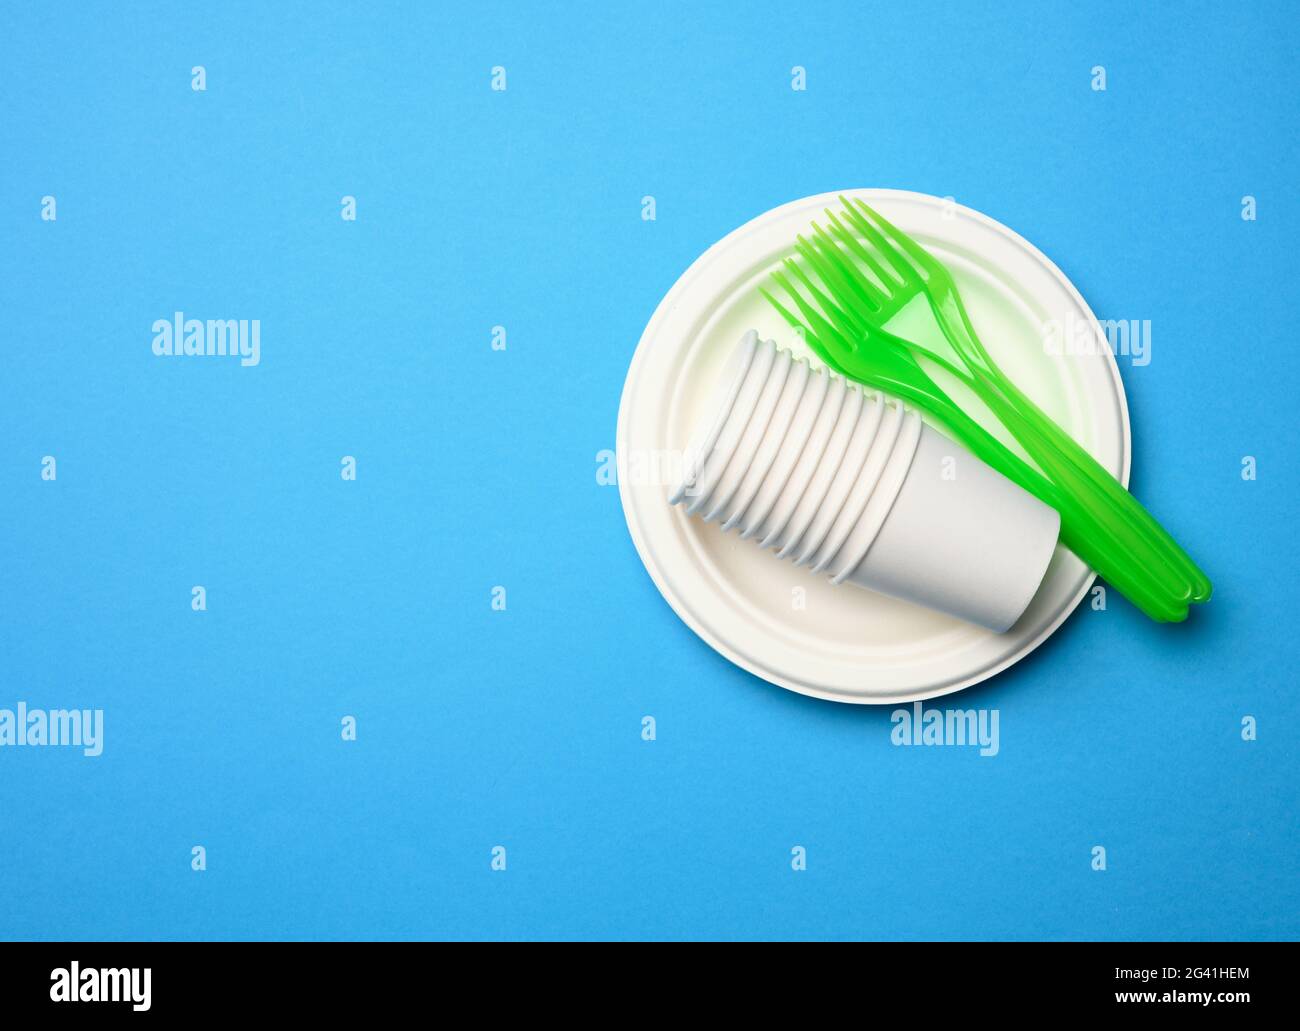 Green plastic forks and empty white paper disposable plates on a blue background, Stock Photo